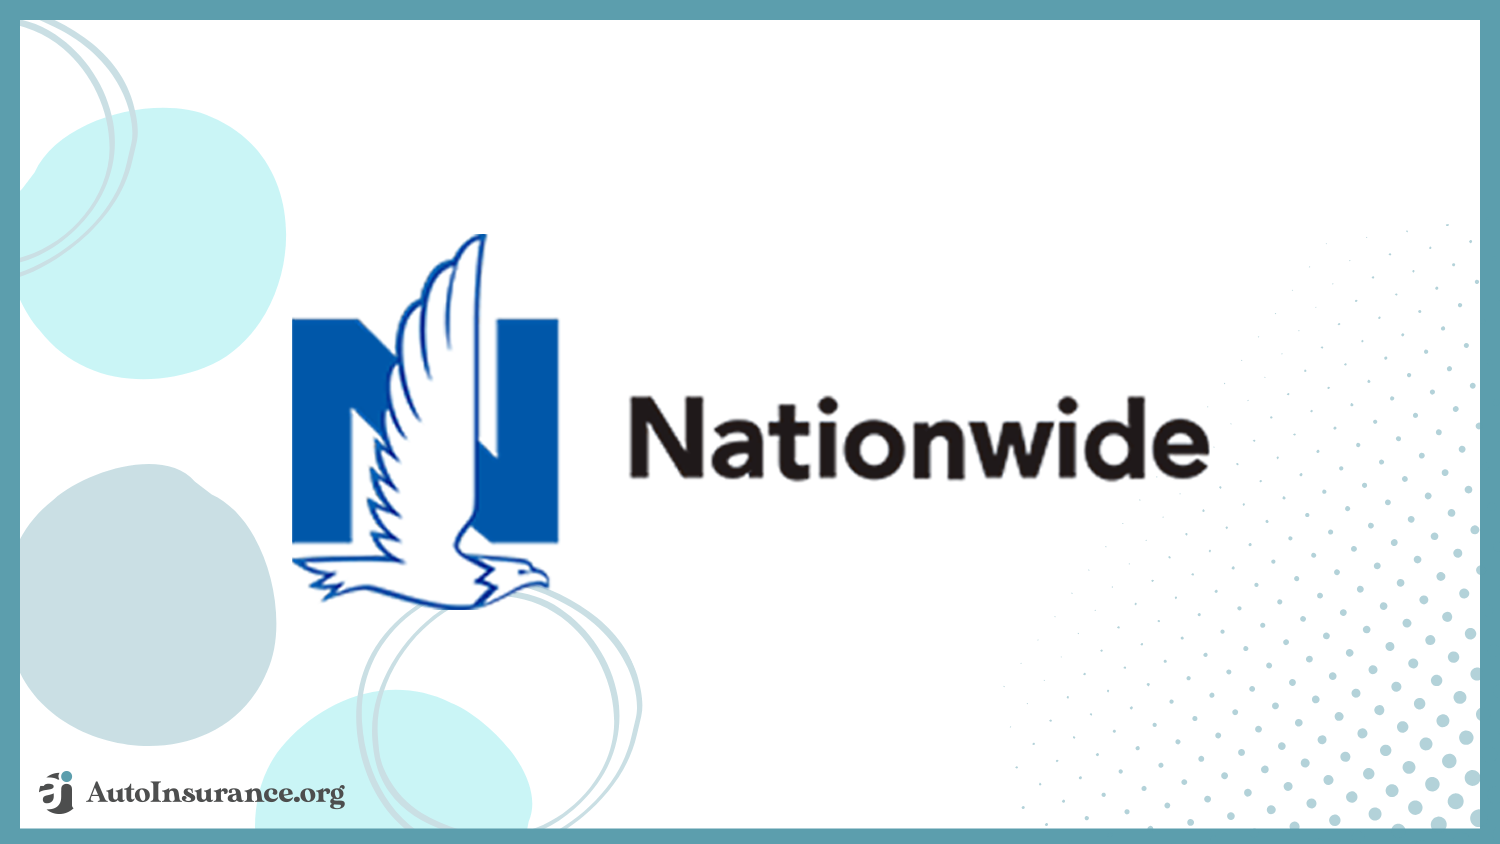 Nationwide: Best Auto Insurance for a Student Away at College